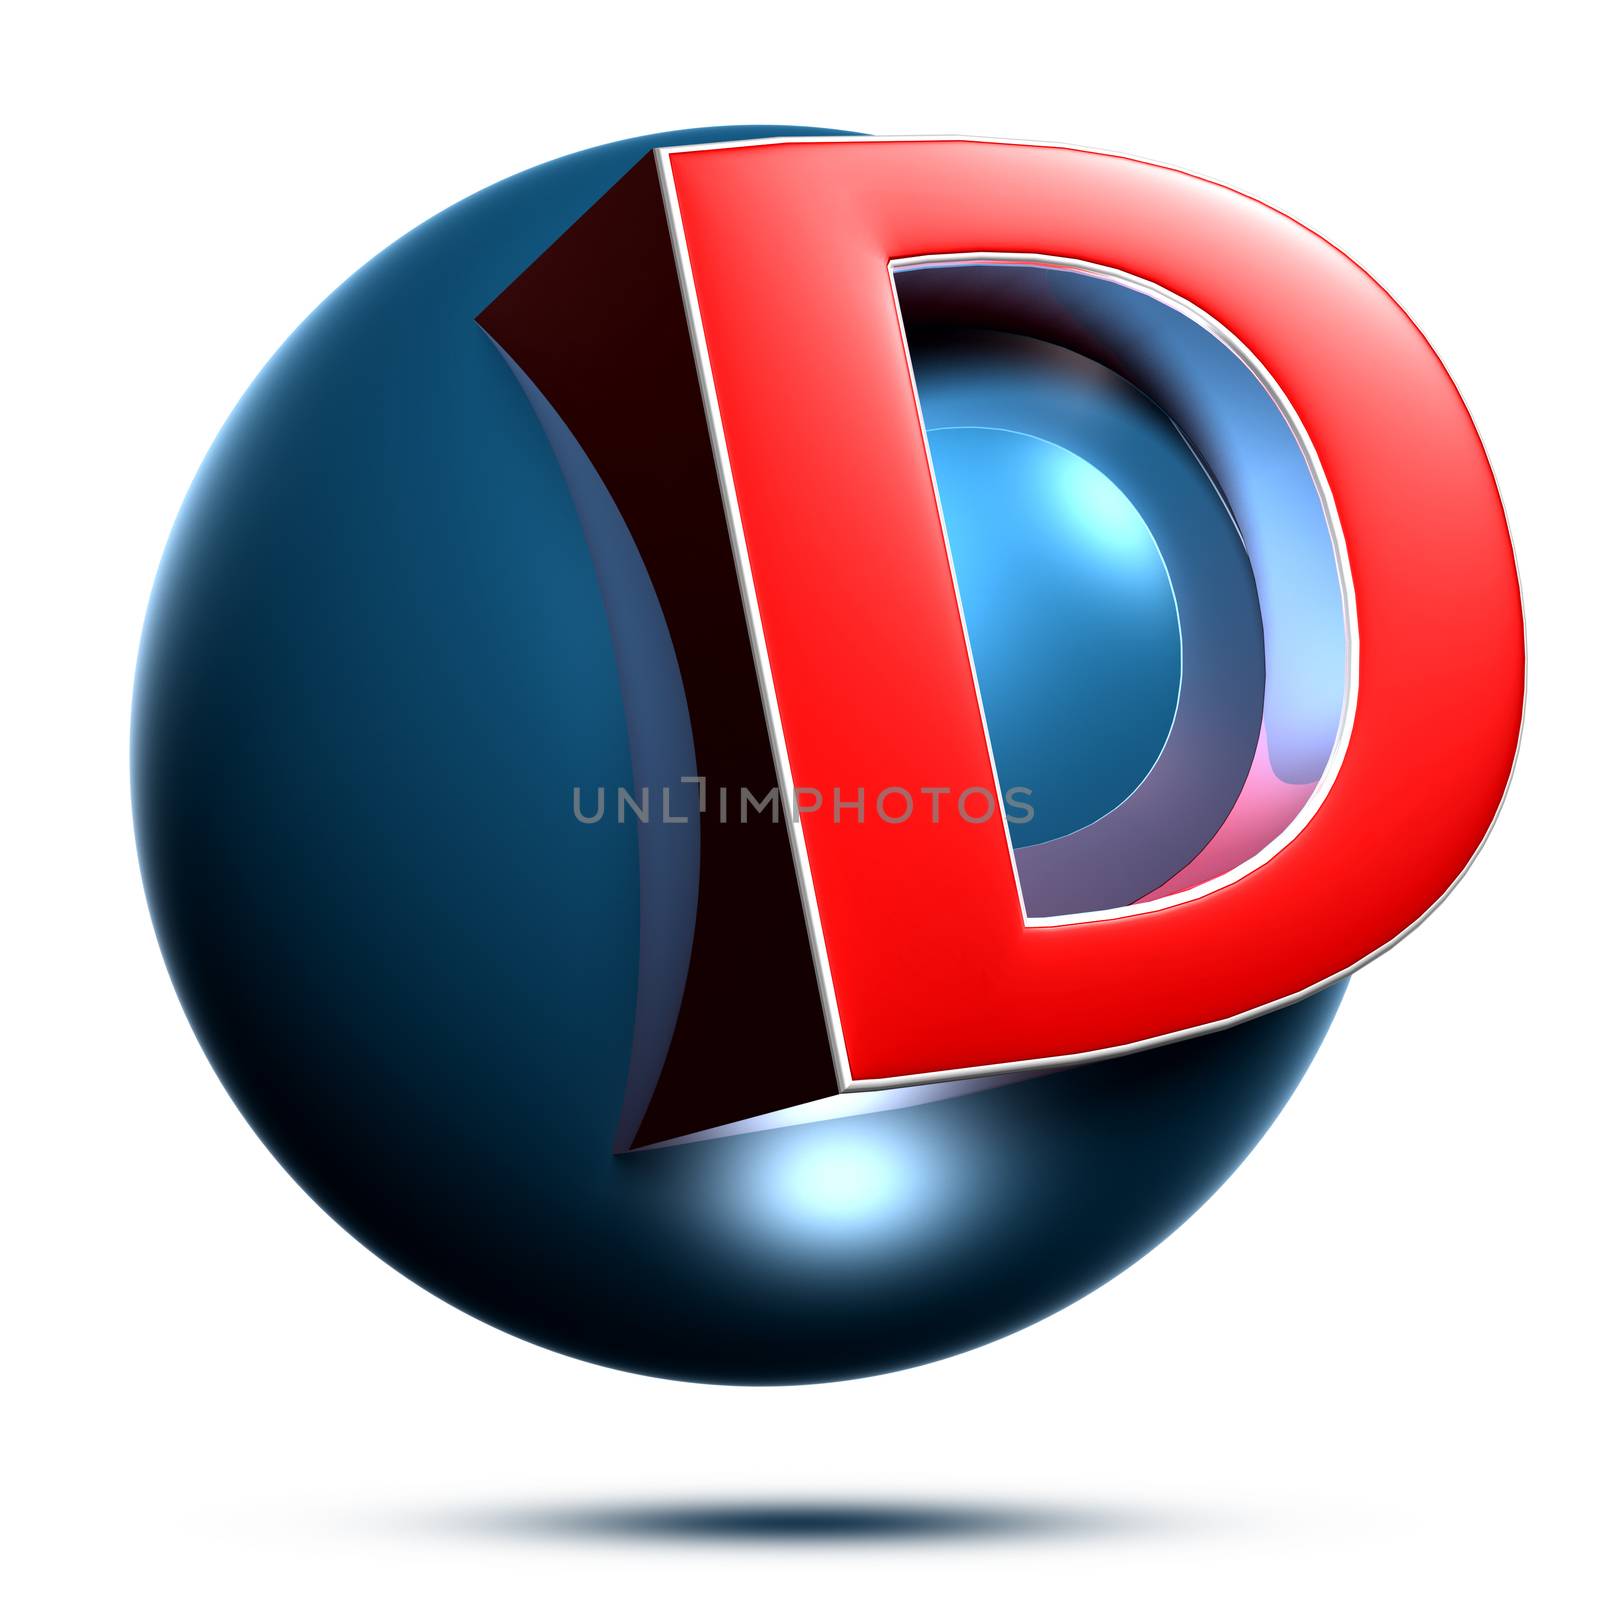 D logo isolated on white background illustration 3D rendering with clipping path.